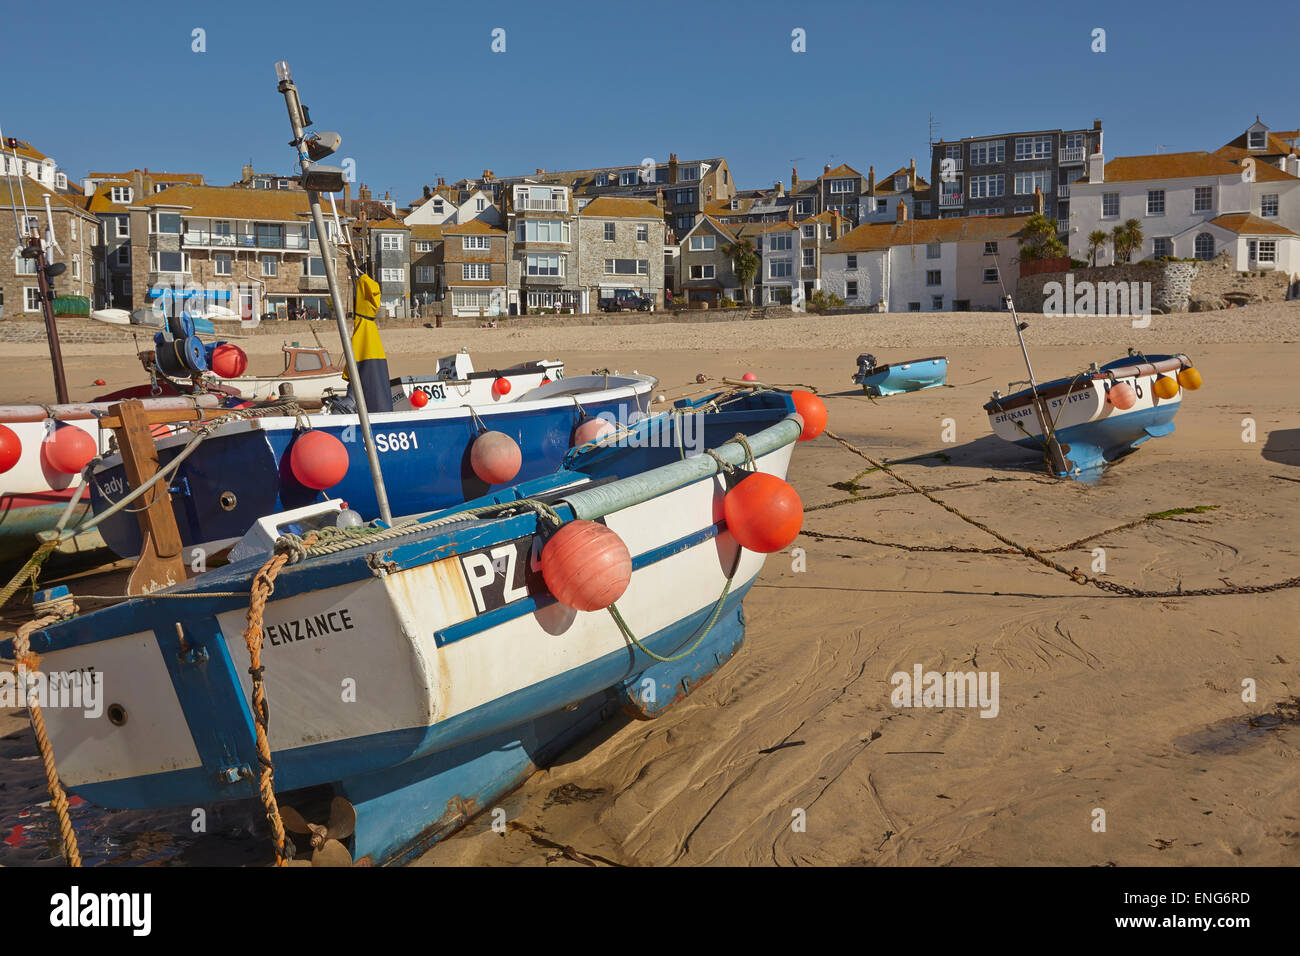 Fishing boat in the harbour, seen at low tide, in St Ives, Cornwall, Great Britain. Stock Photo